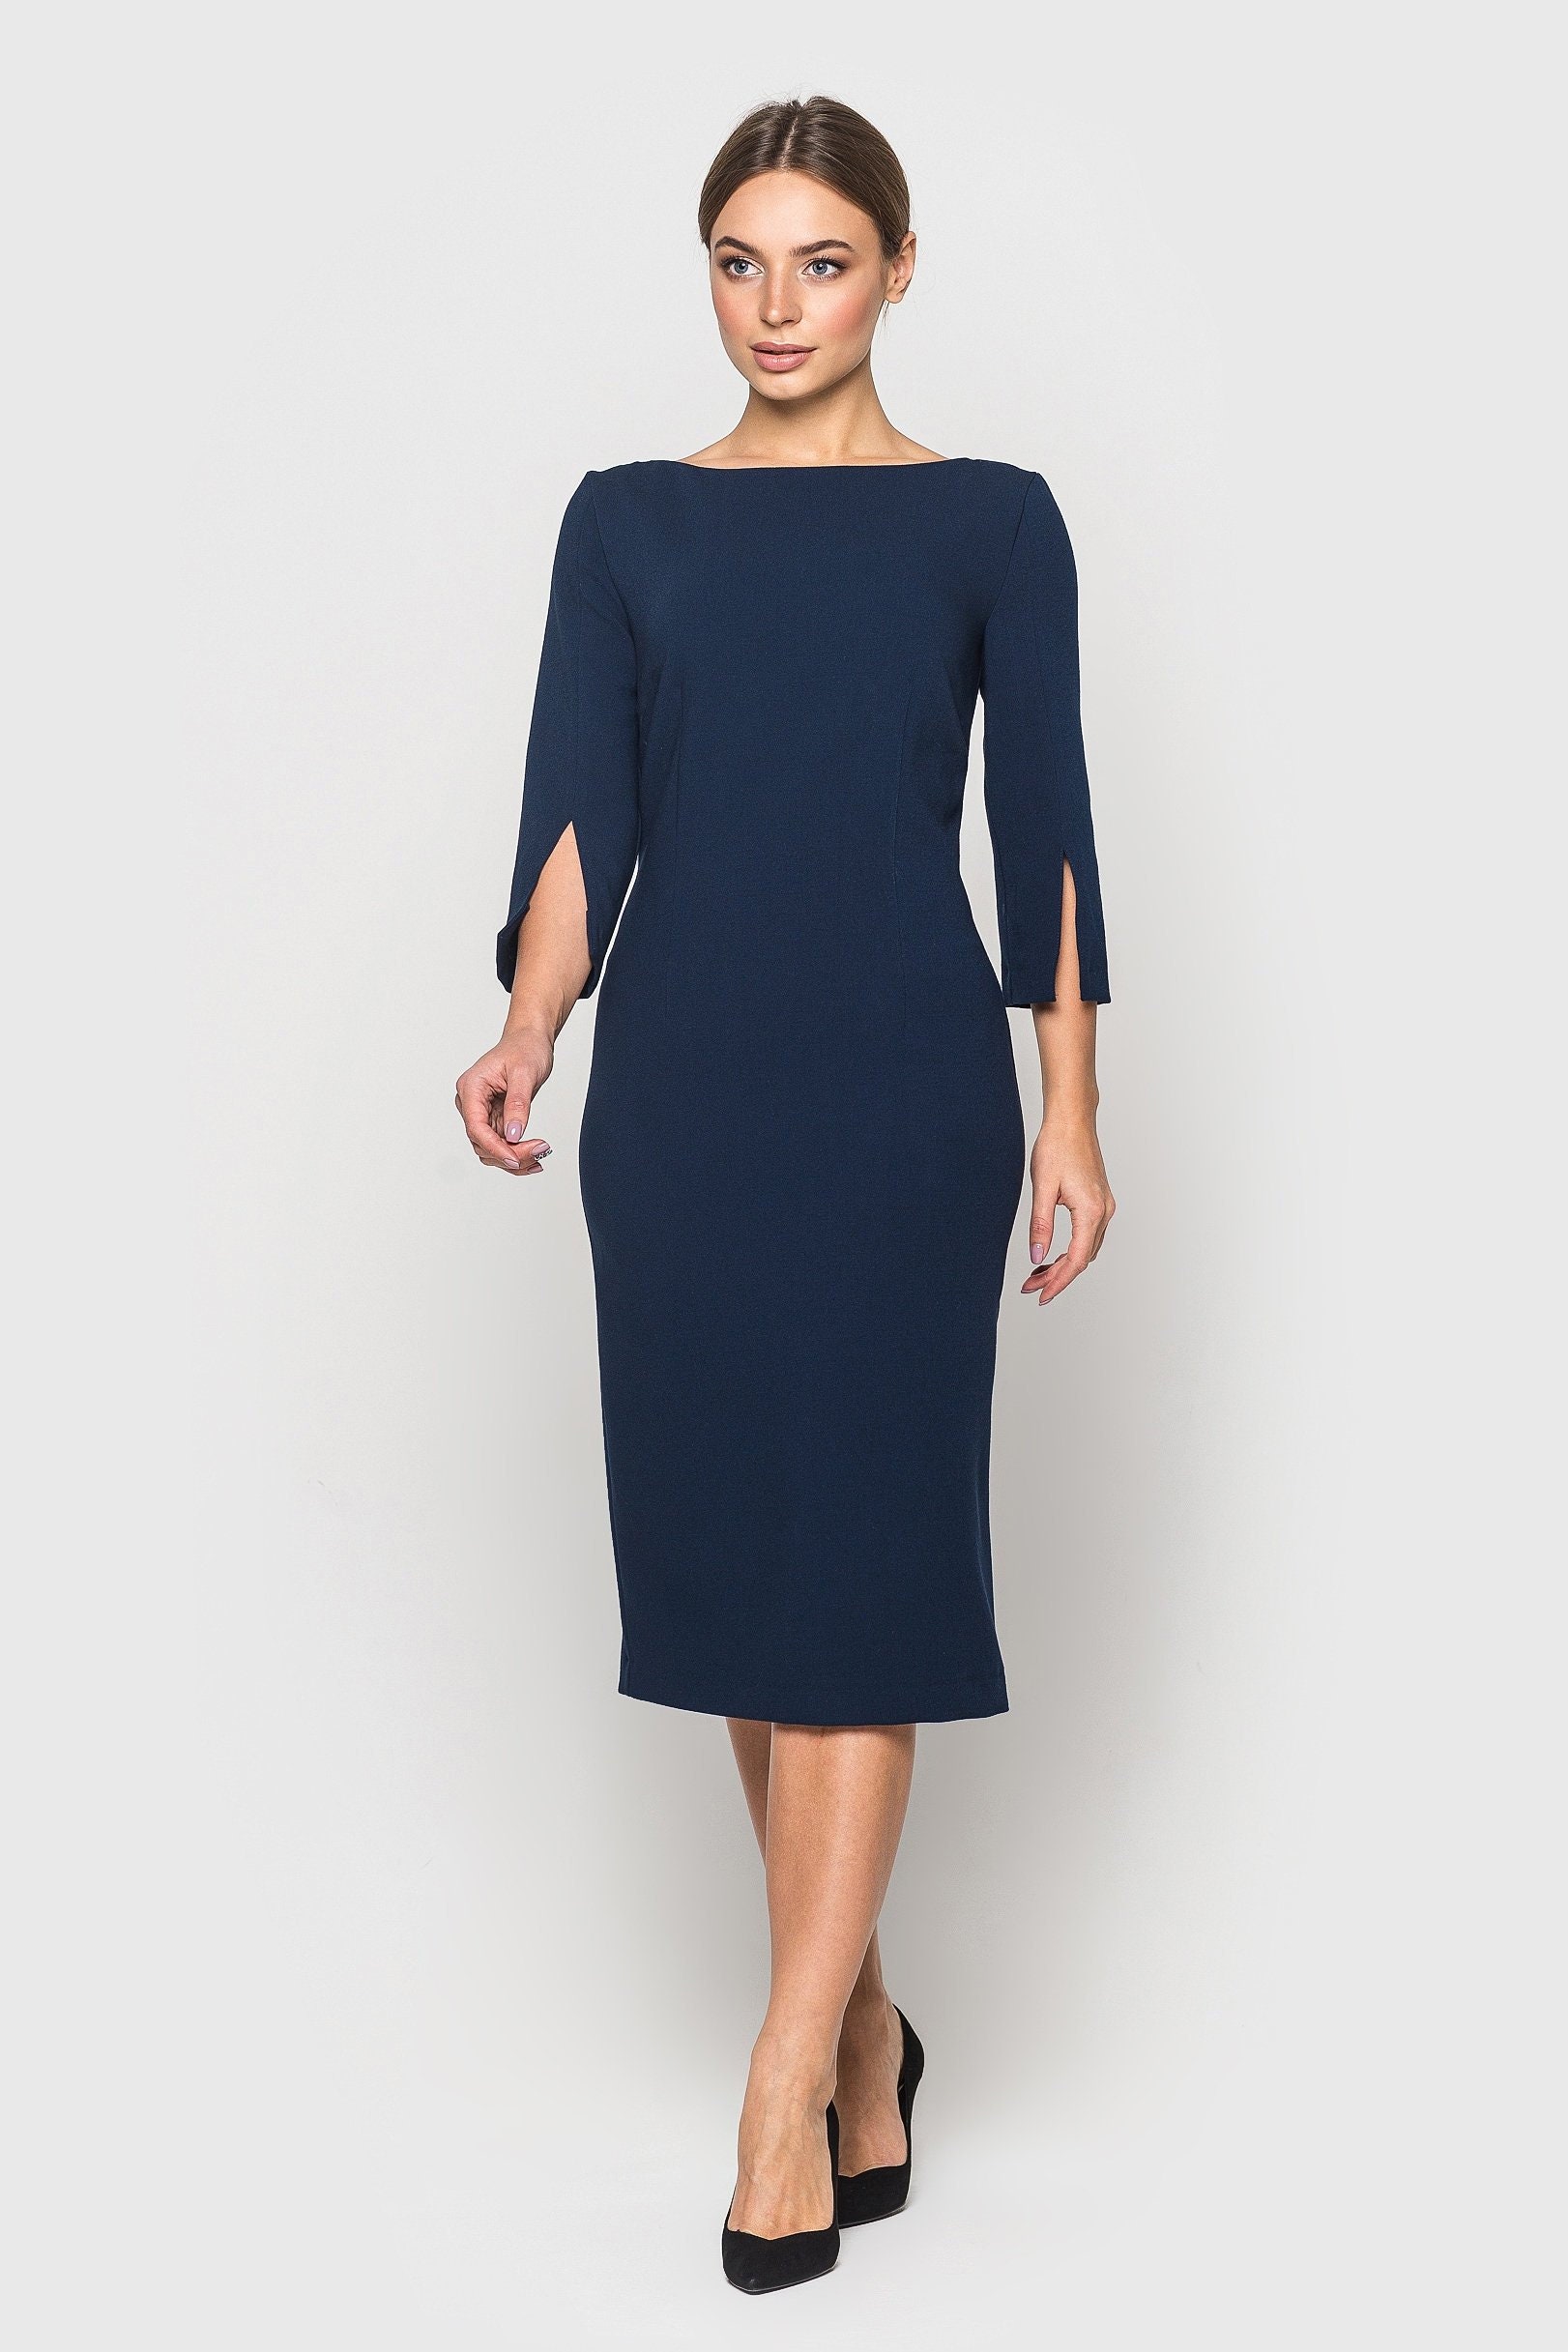 3 4 sleeve dresses for wedding guest